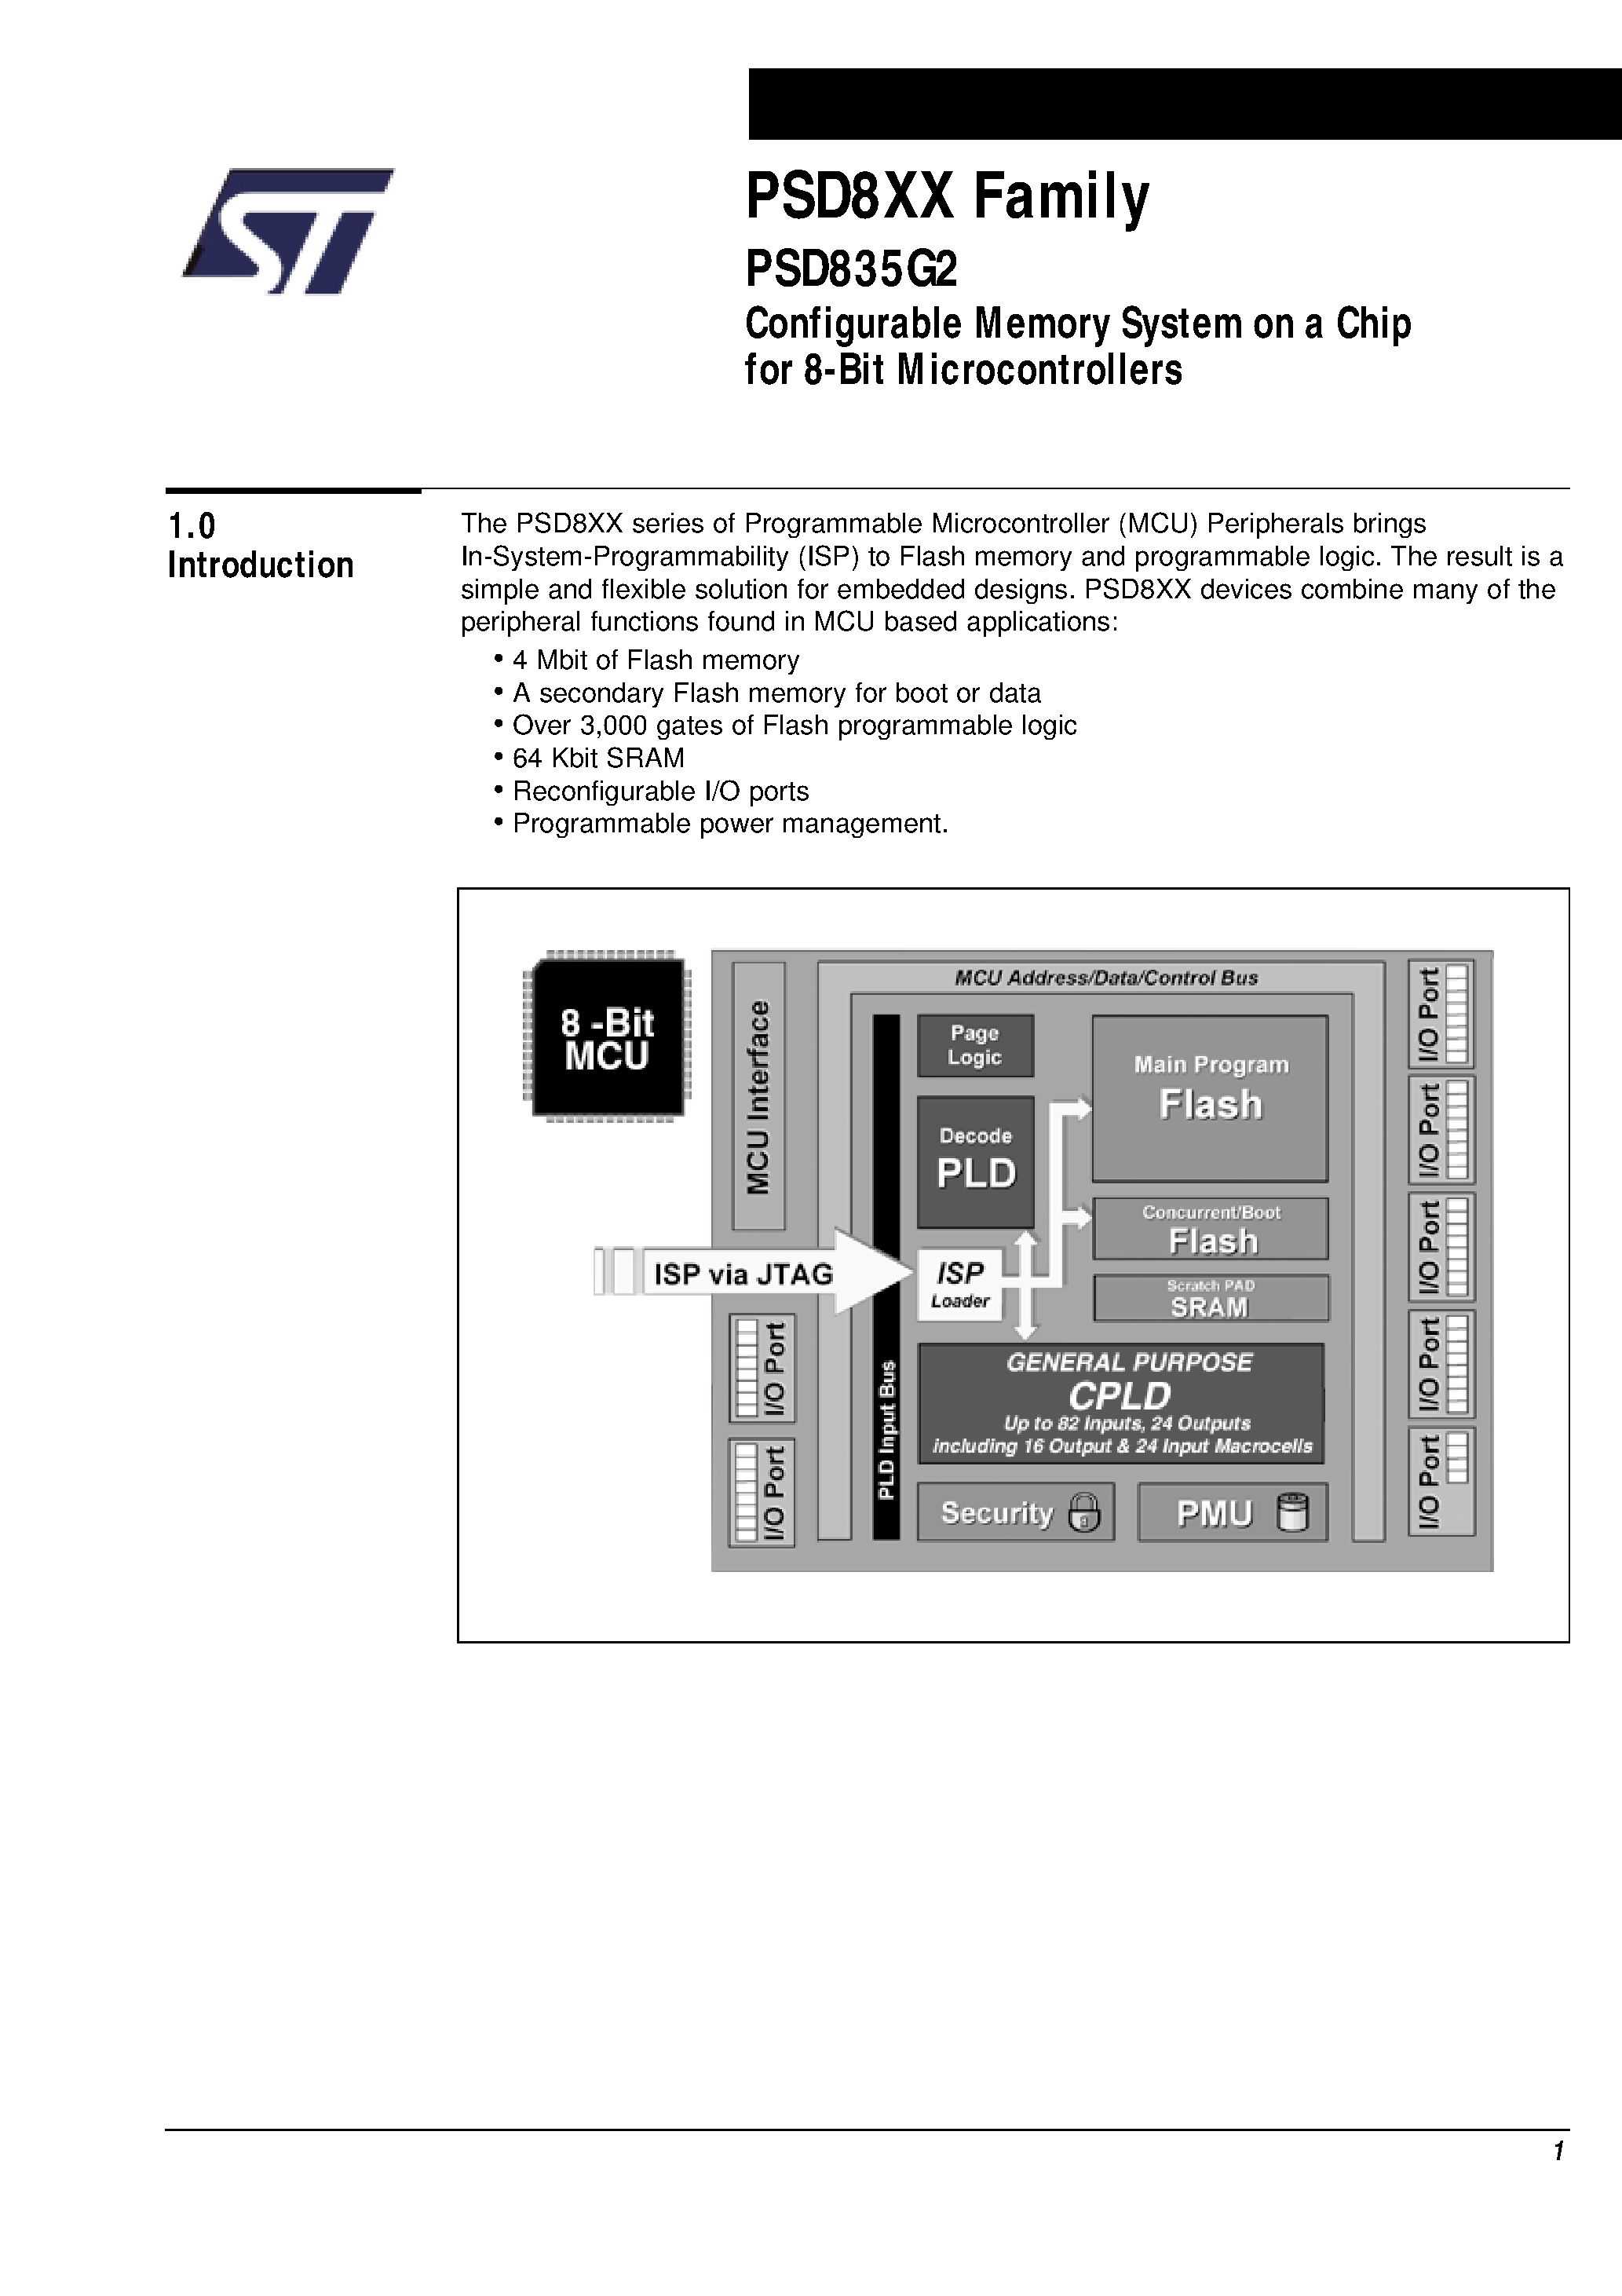 Datasheet PSD835F1V-A-15MI - Configurable Memory System on a Chip for 8-Bit Microcontrollers page 2